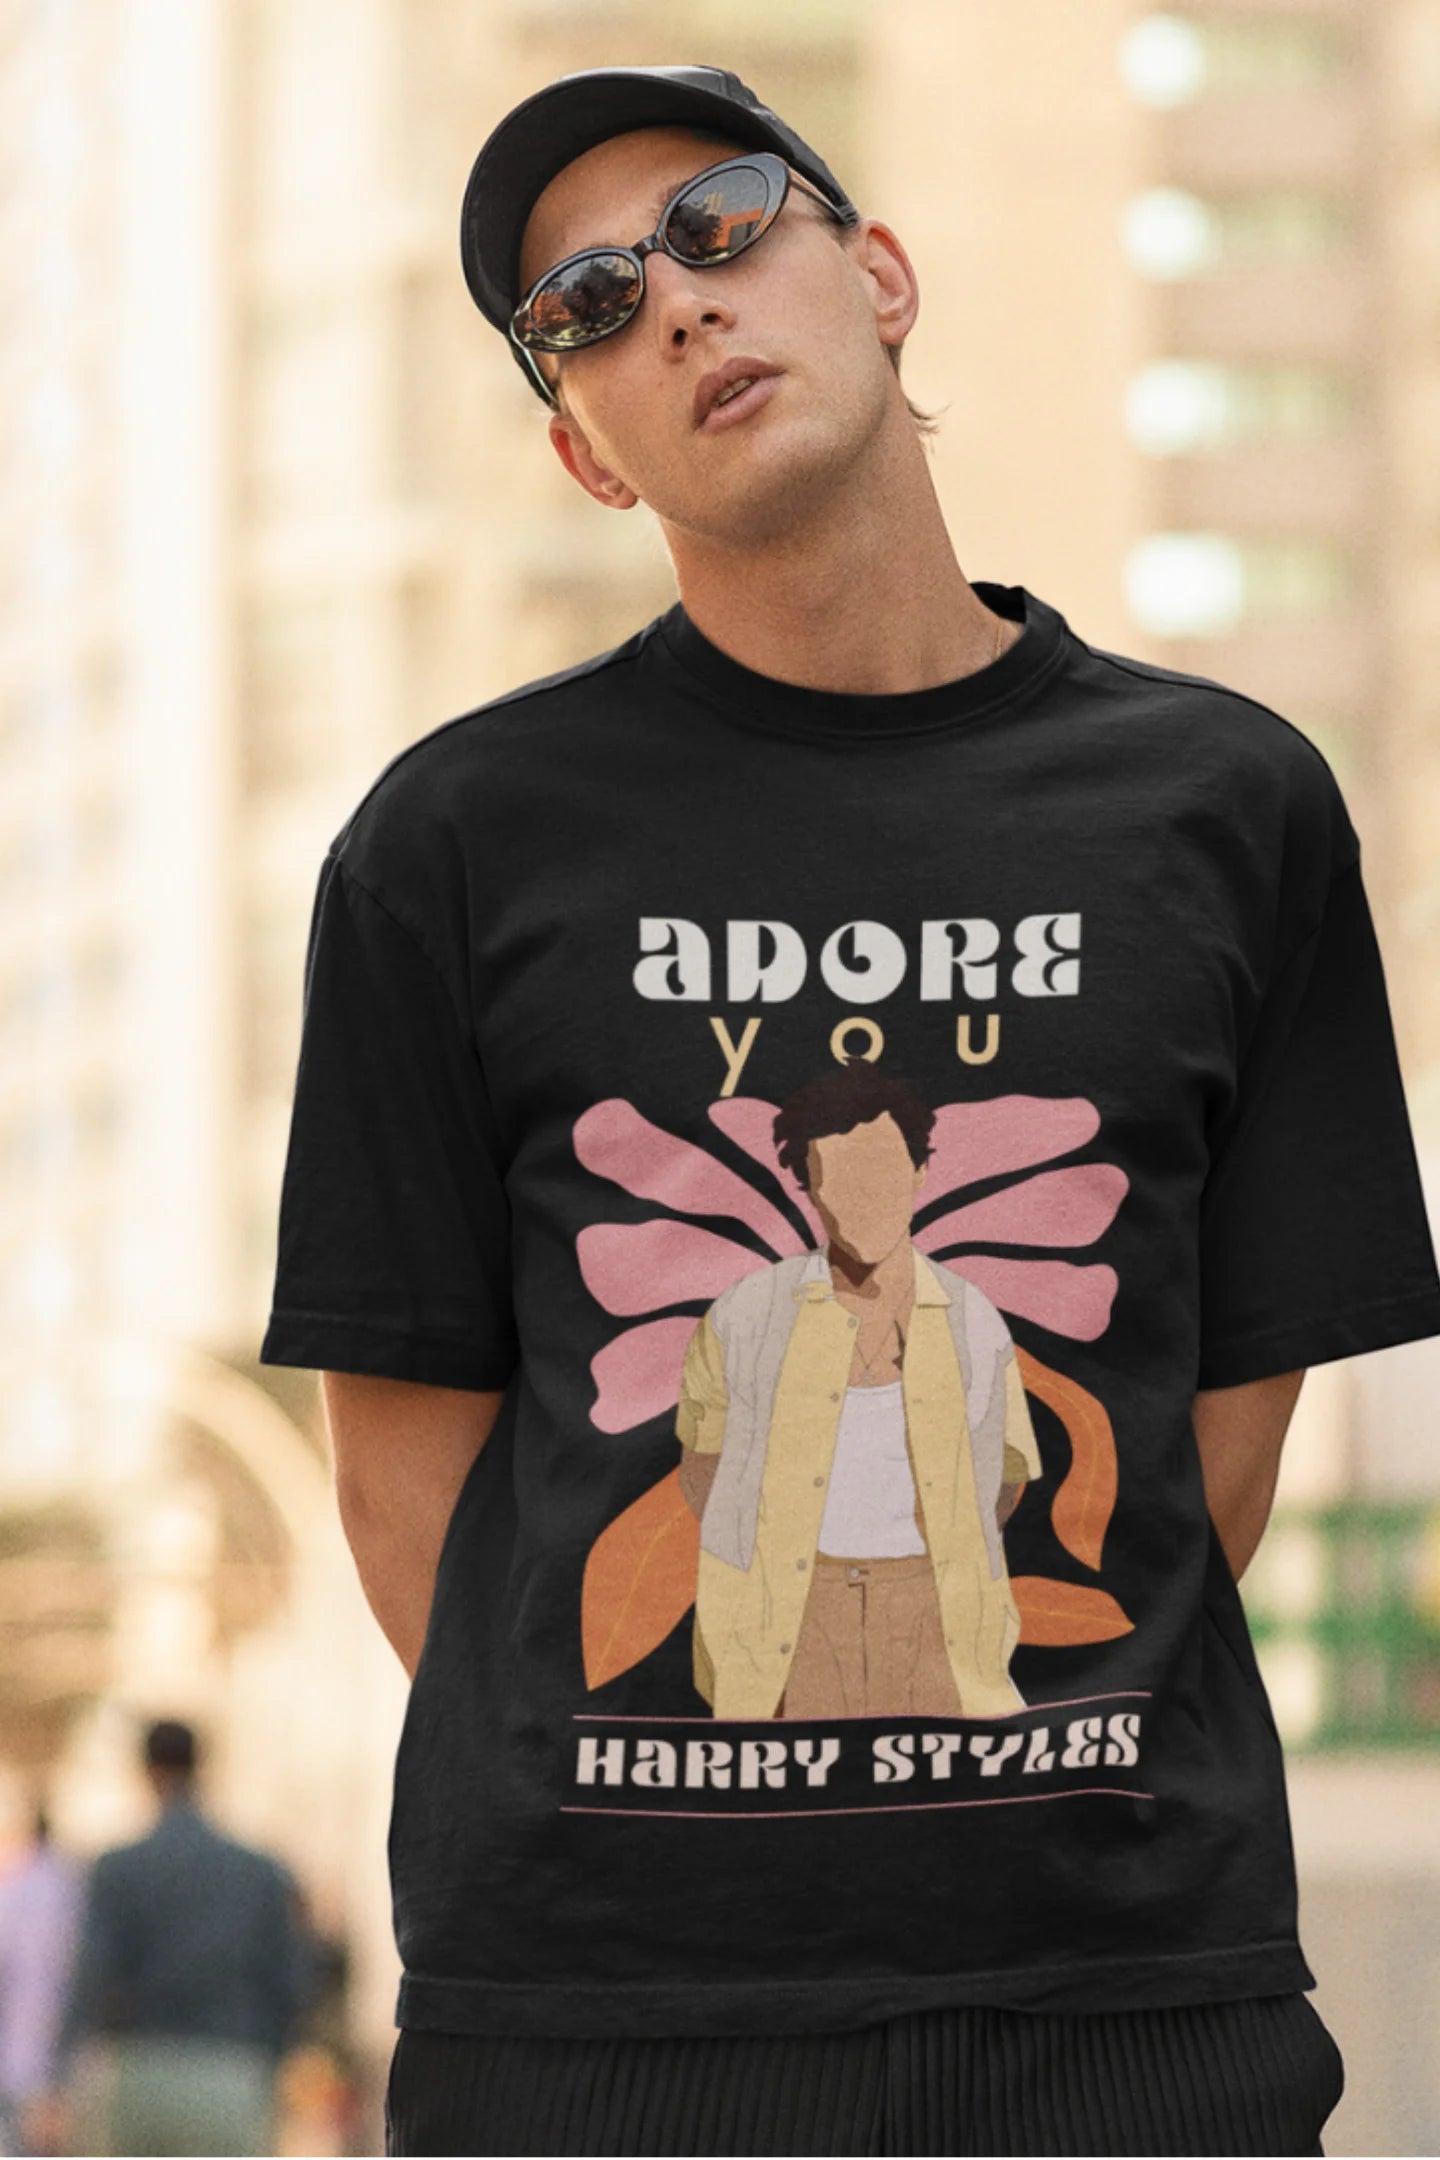 Second image of man wearing black oversized t-shirt featuring 'Adore You' inspired design - ideal for fans of Harry Styles and One Direction